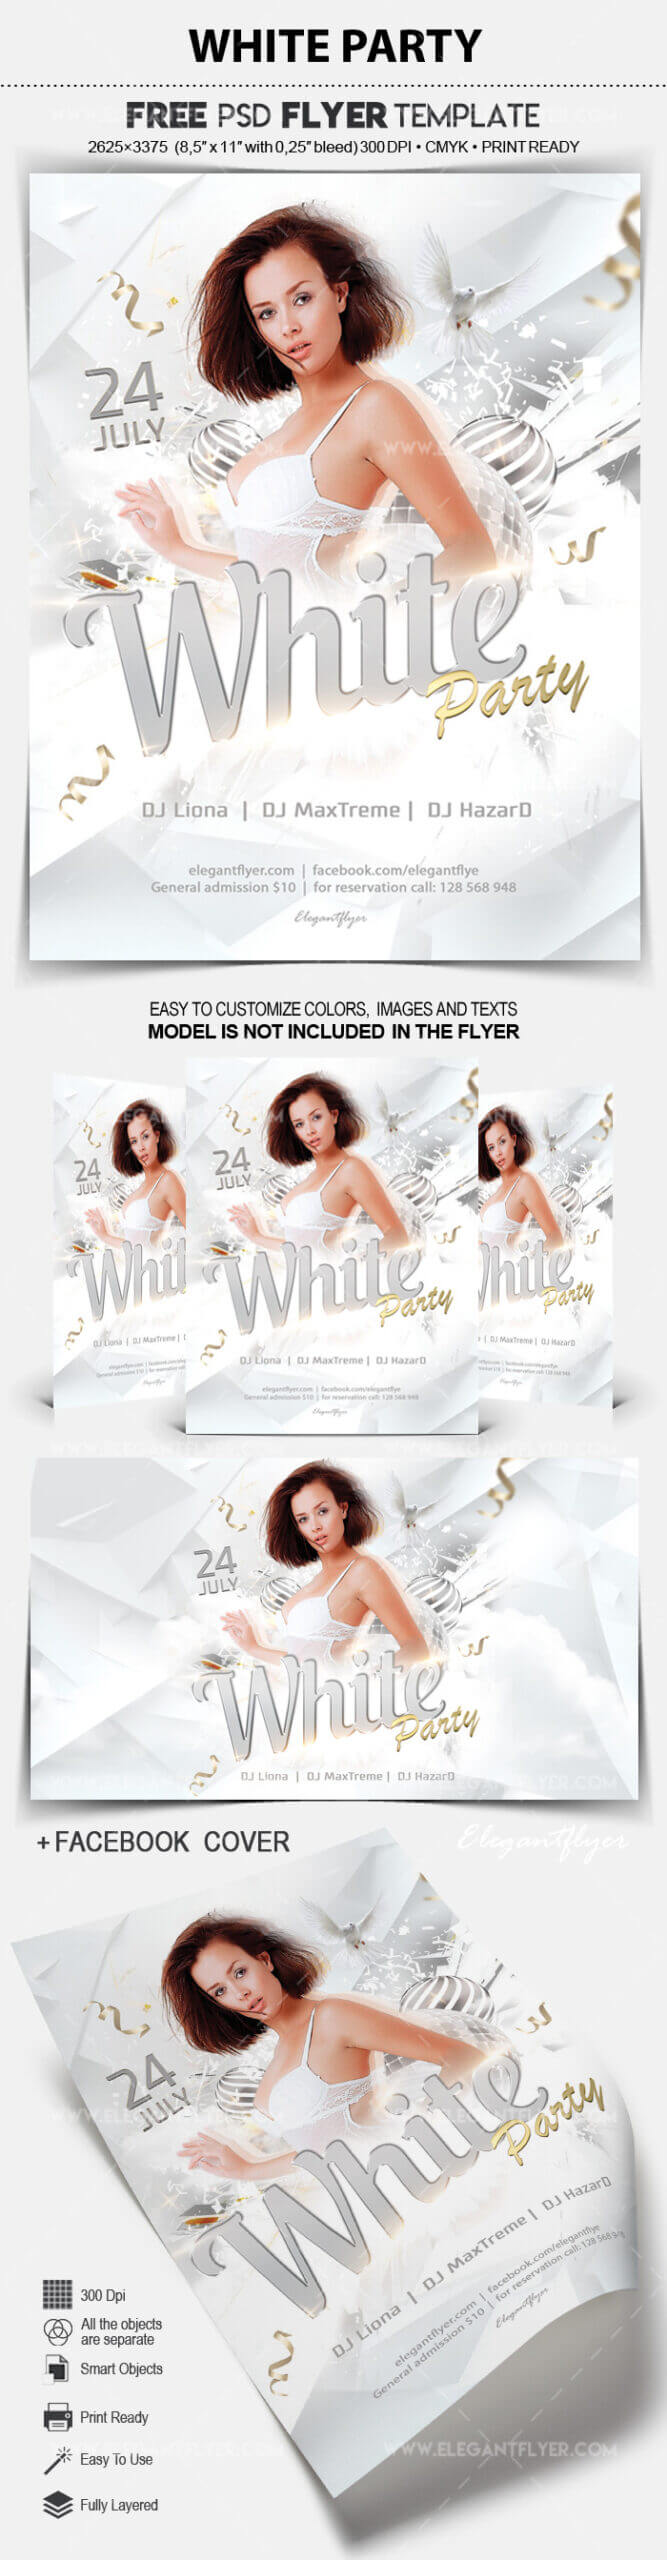 White Party – Free Flyer Psd Template Intended For All White Party Flyer Template Free